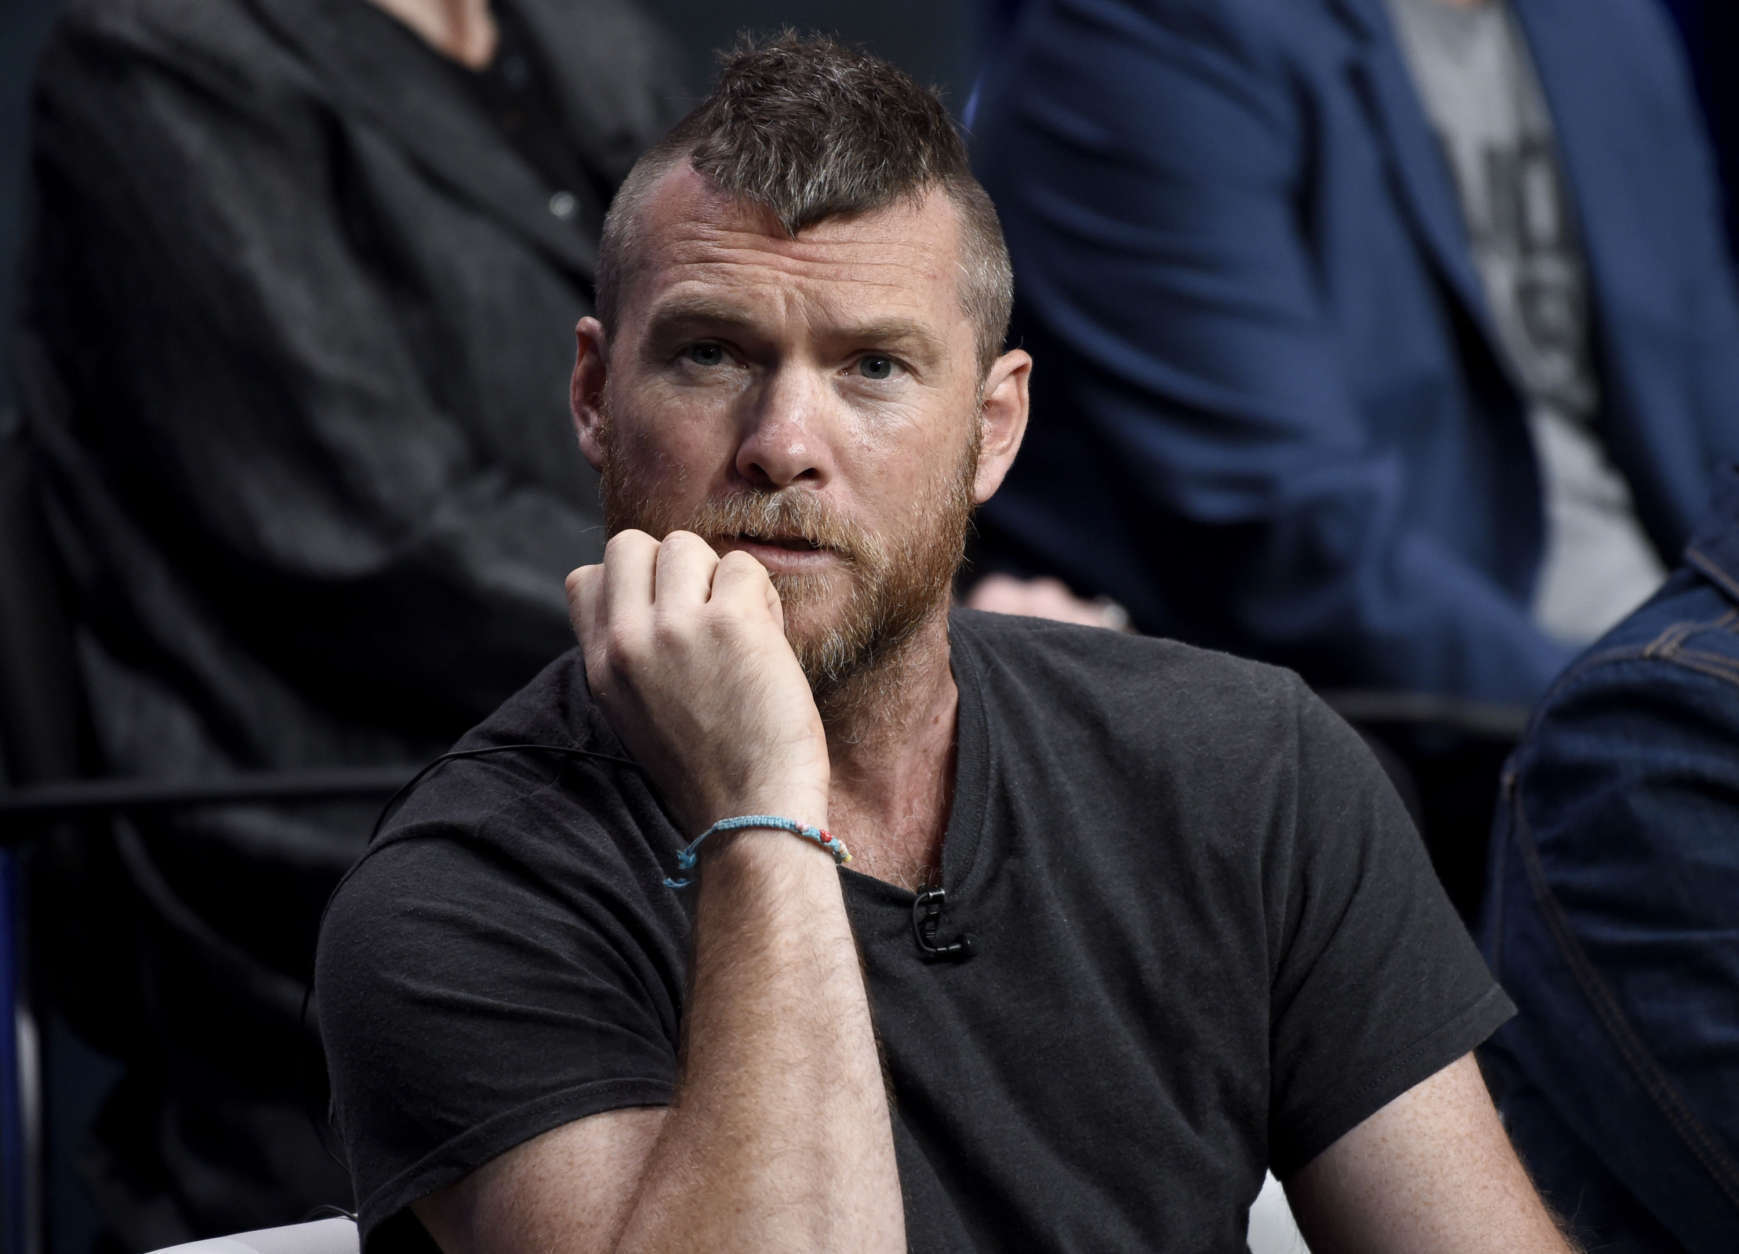 Sam Worthington participates in the "Manhunt: Unabomber" panel during the Discovery Channel Television Critics Association Summer Press Tour at the Beverly Hilton on Wednesday, July 26, 2017, in Beverly Hills, Calif. (Photo by Chris Pizzello/Invision/AP)